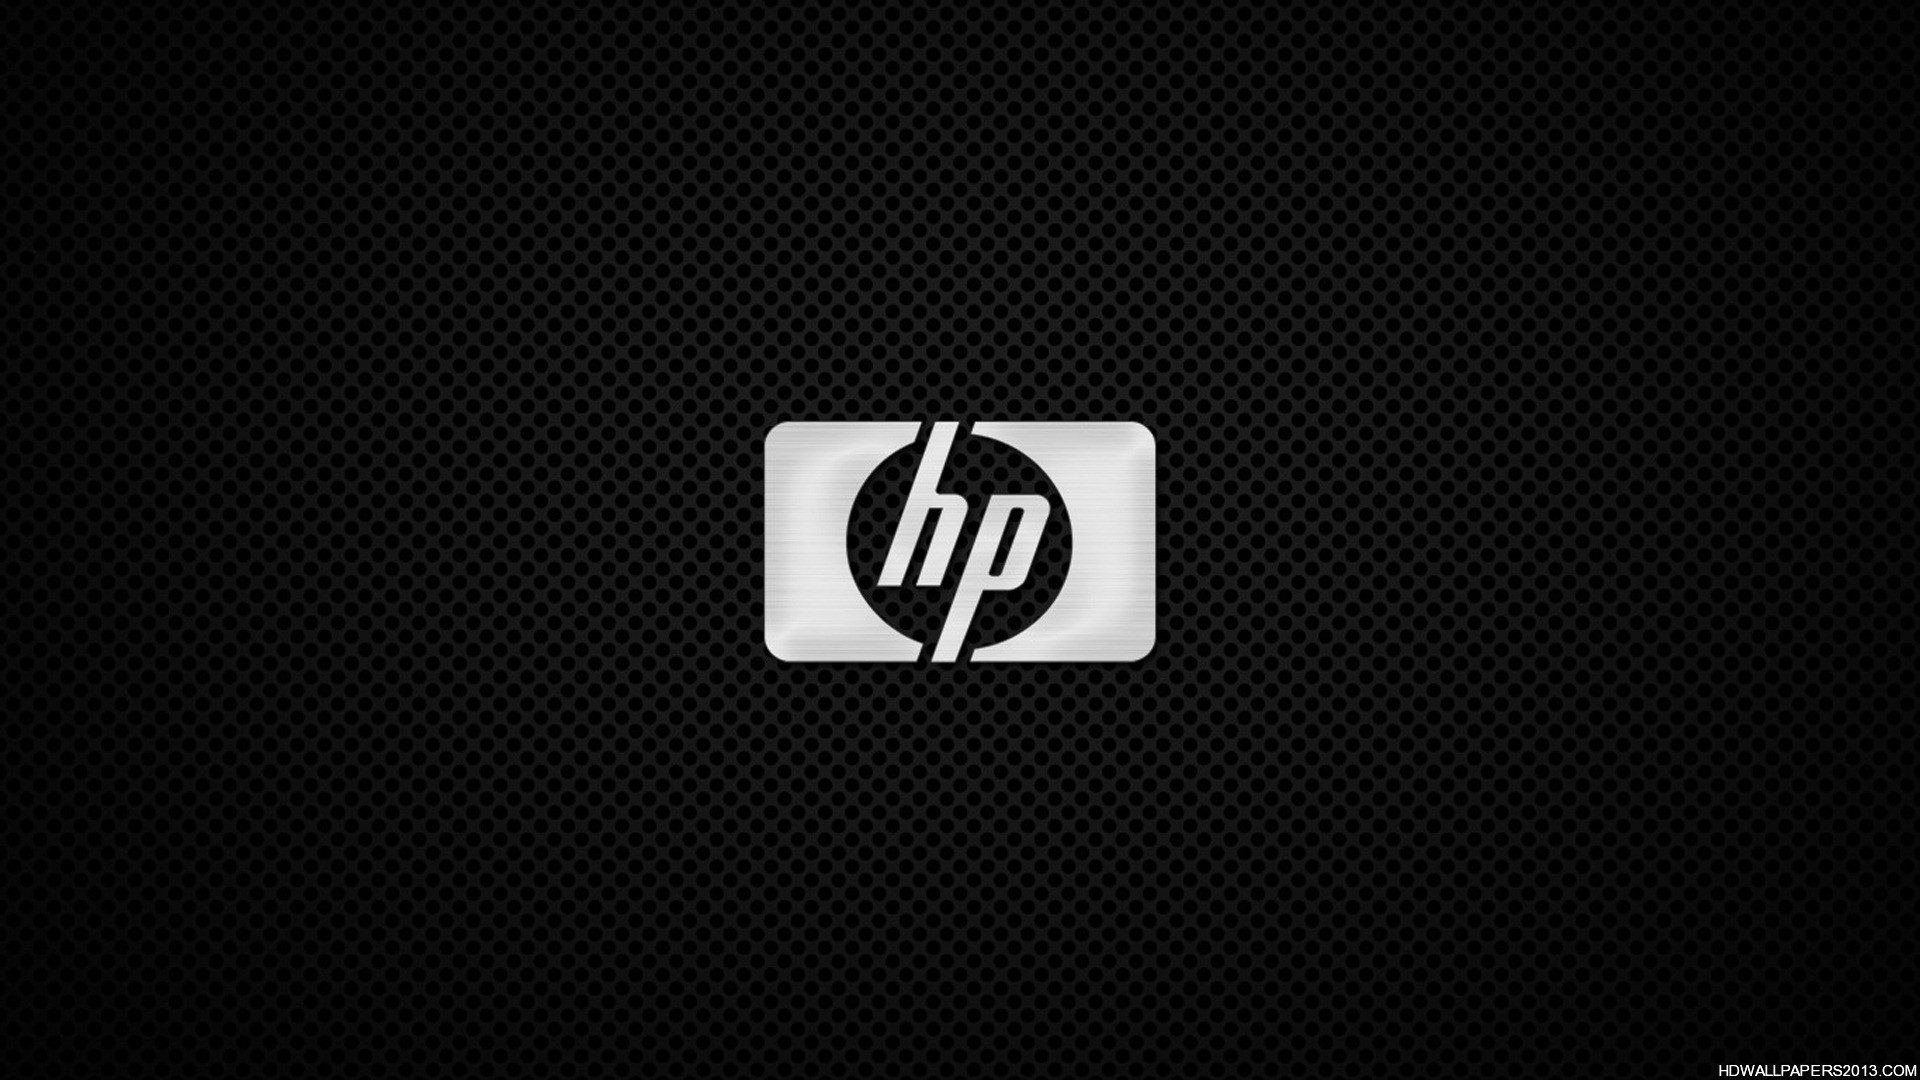 Hp Notebook Wallpaper Submited Image